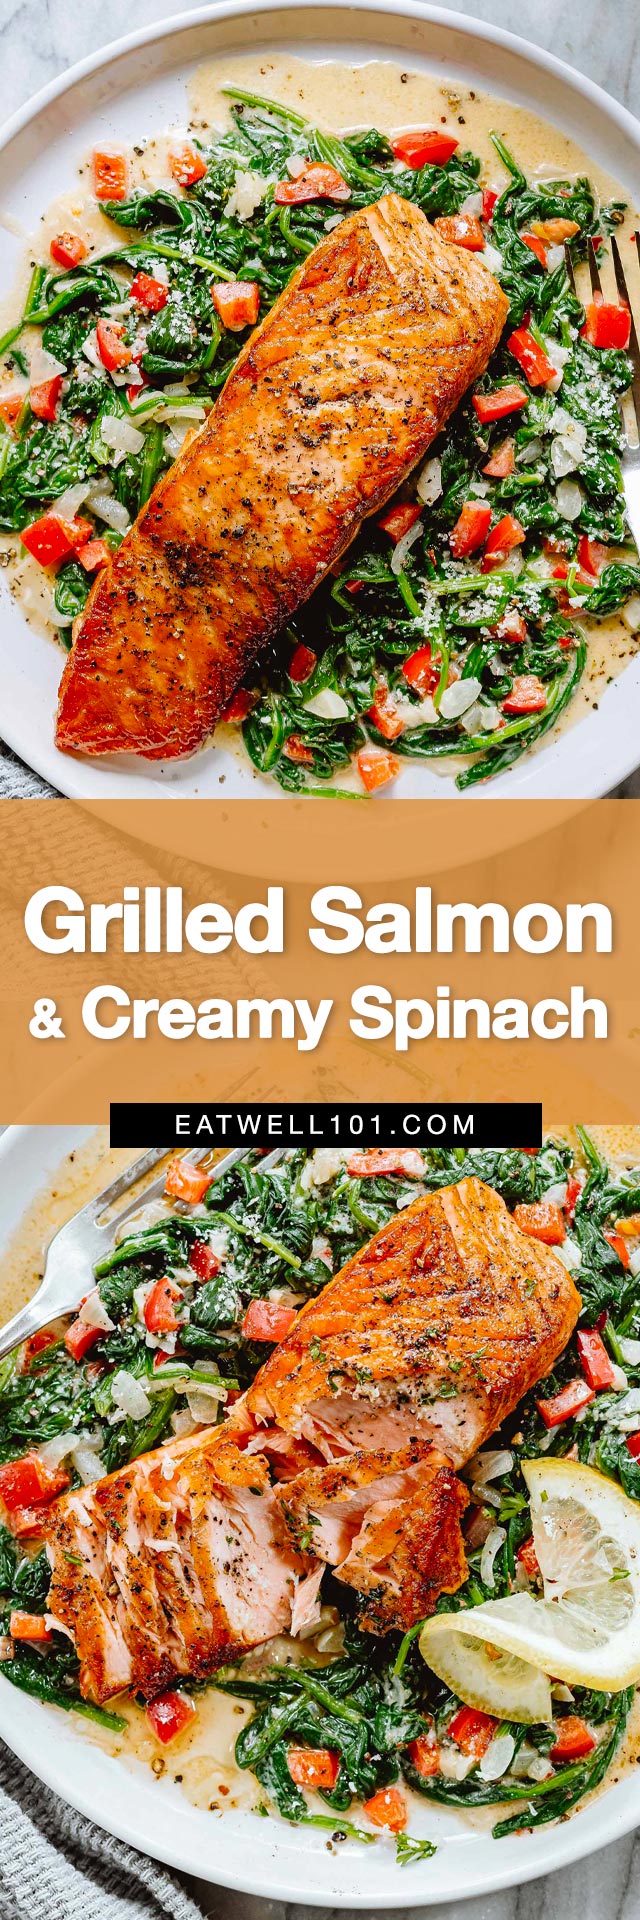 Grilled Salmon with Creamy Spinach - #salmon #spinach #recipe #eatwell101 - This easy Grilled Salmon with Creamy Spinach feels like a restaurant-quality dinner. An easy salmon recipe you'll make again and again!